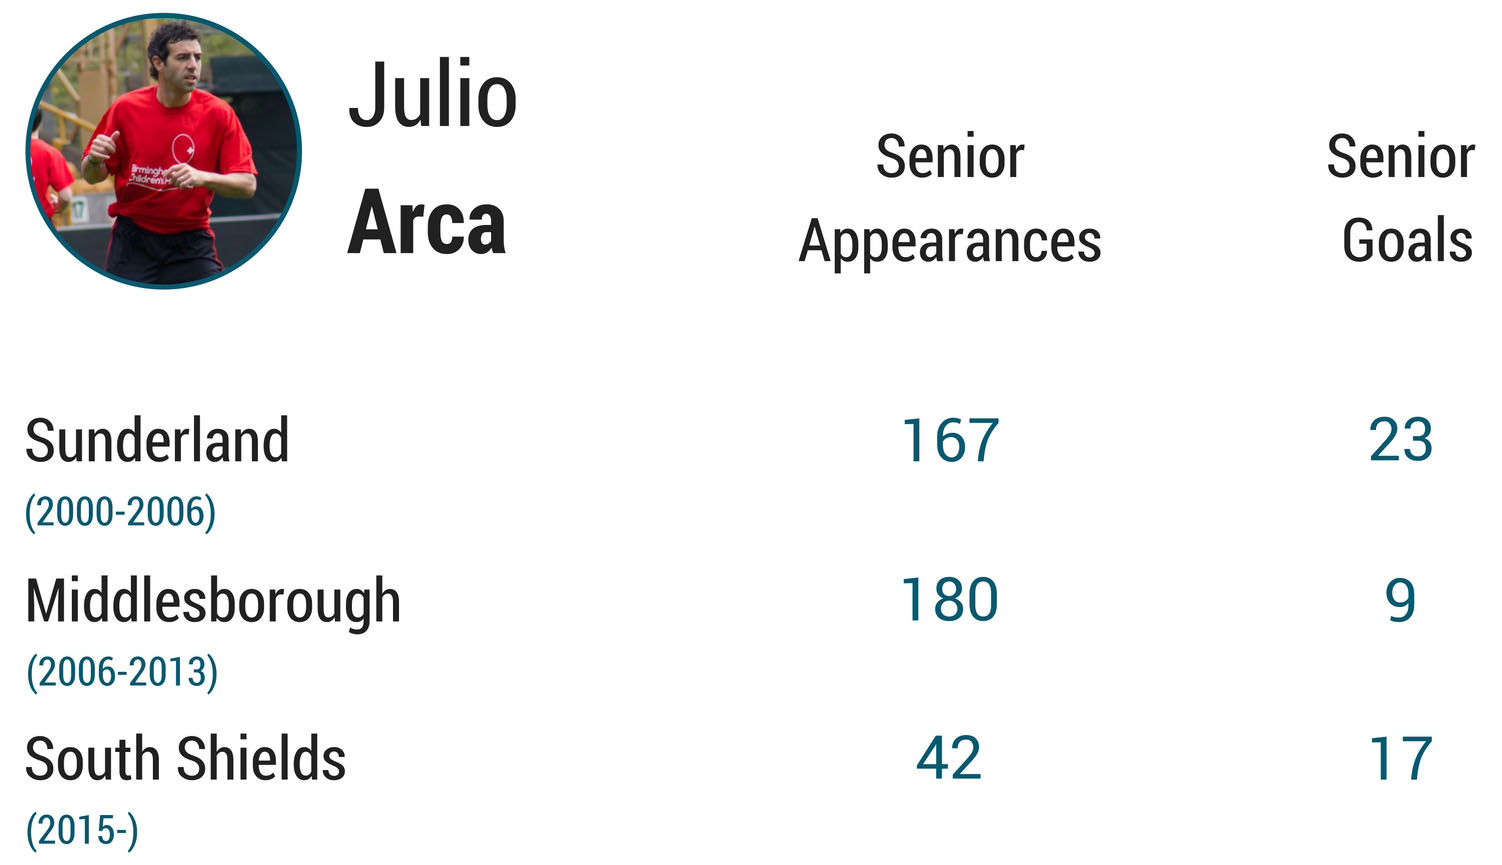 julio arca image with stats